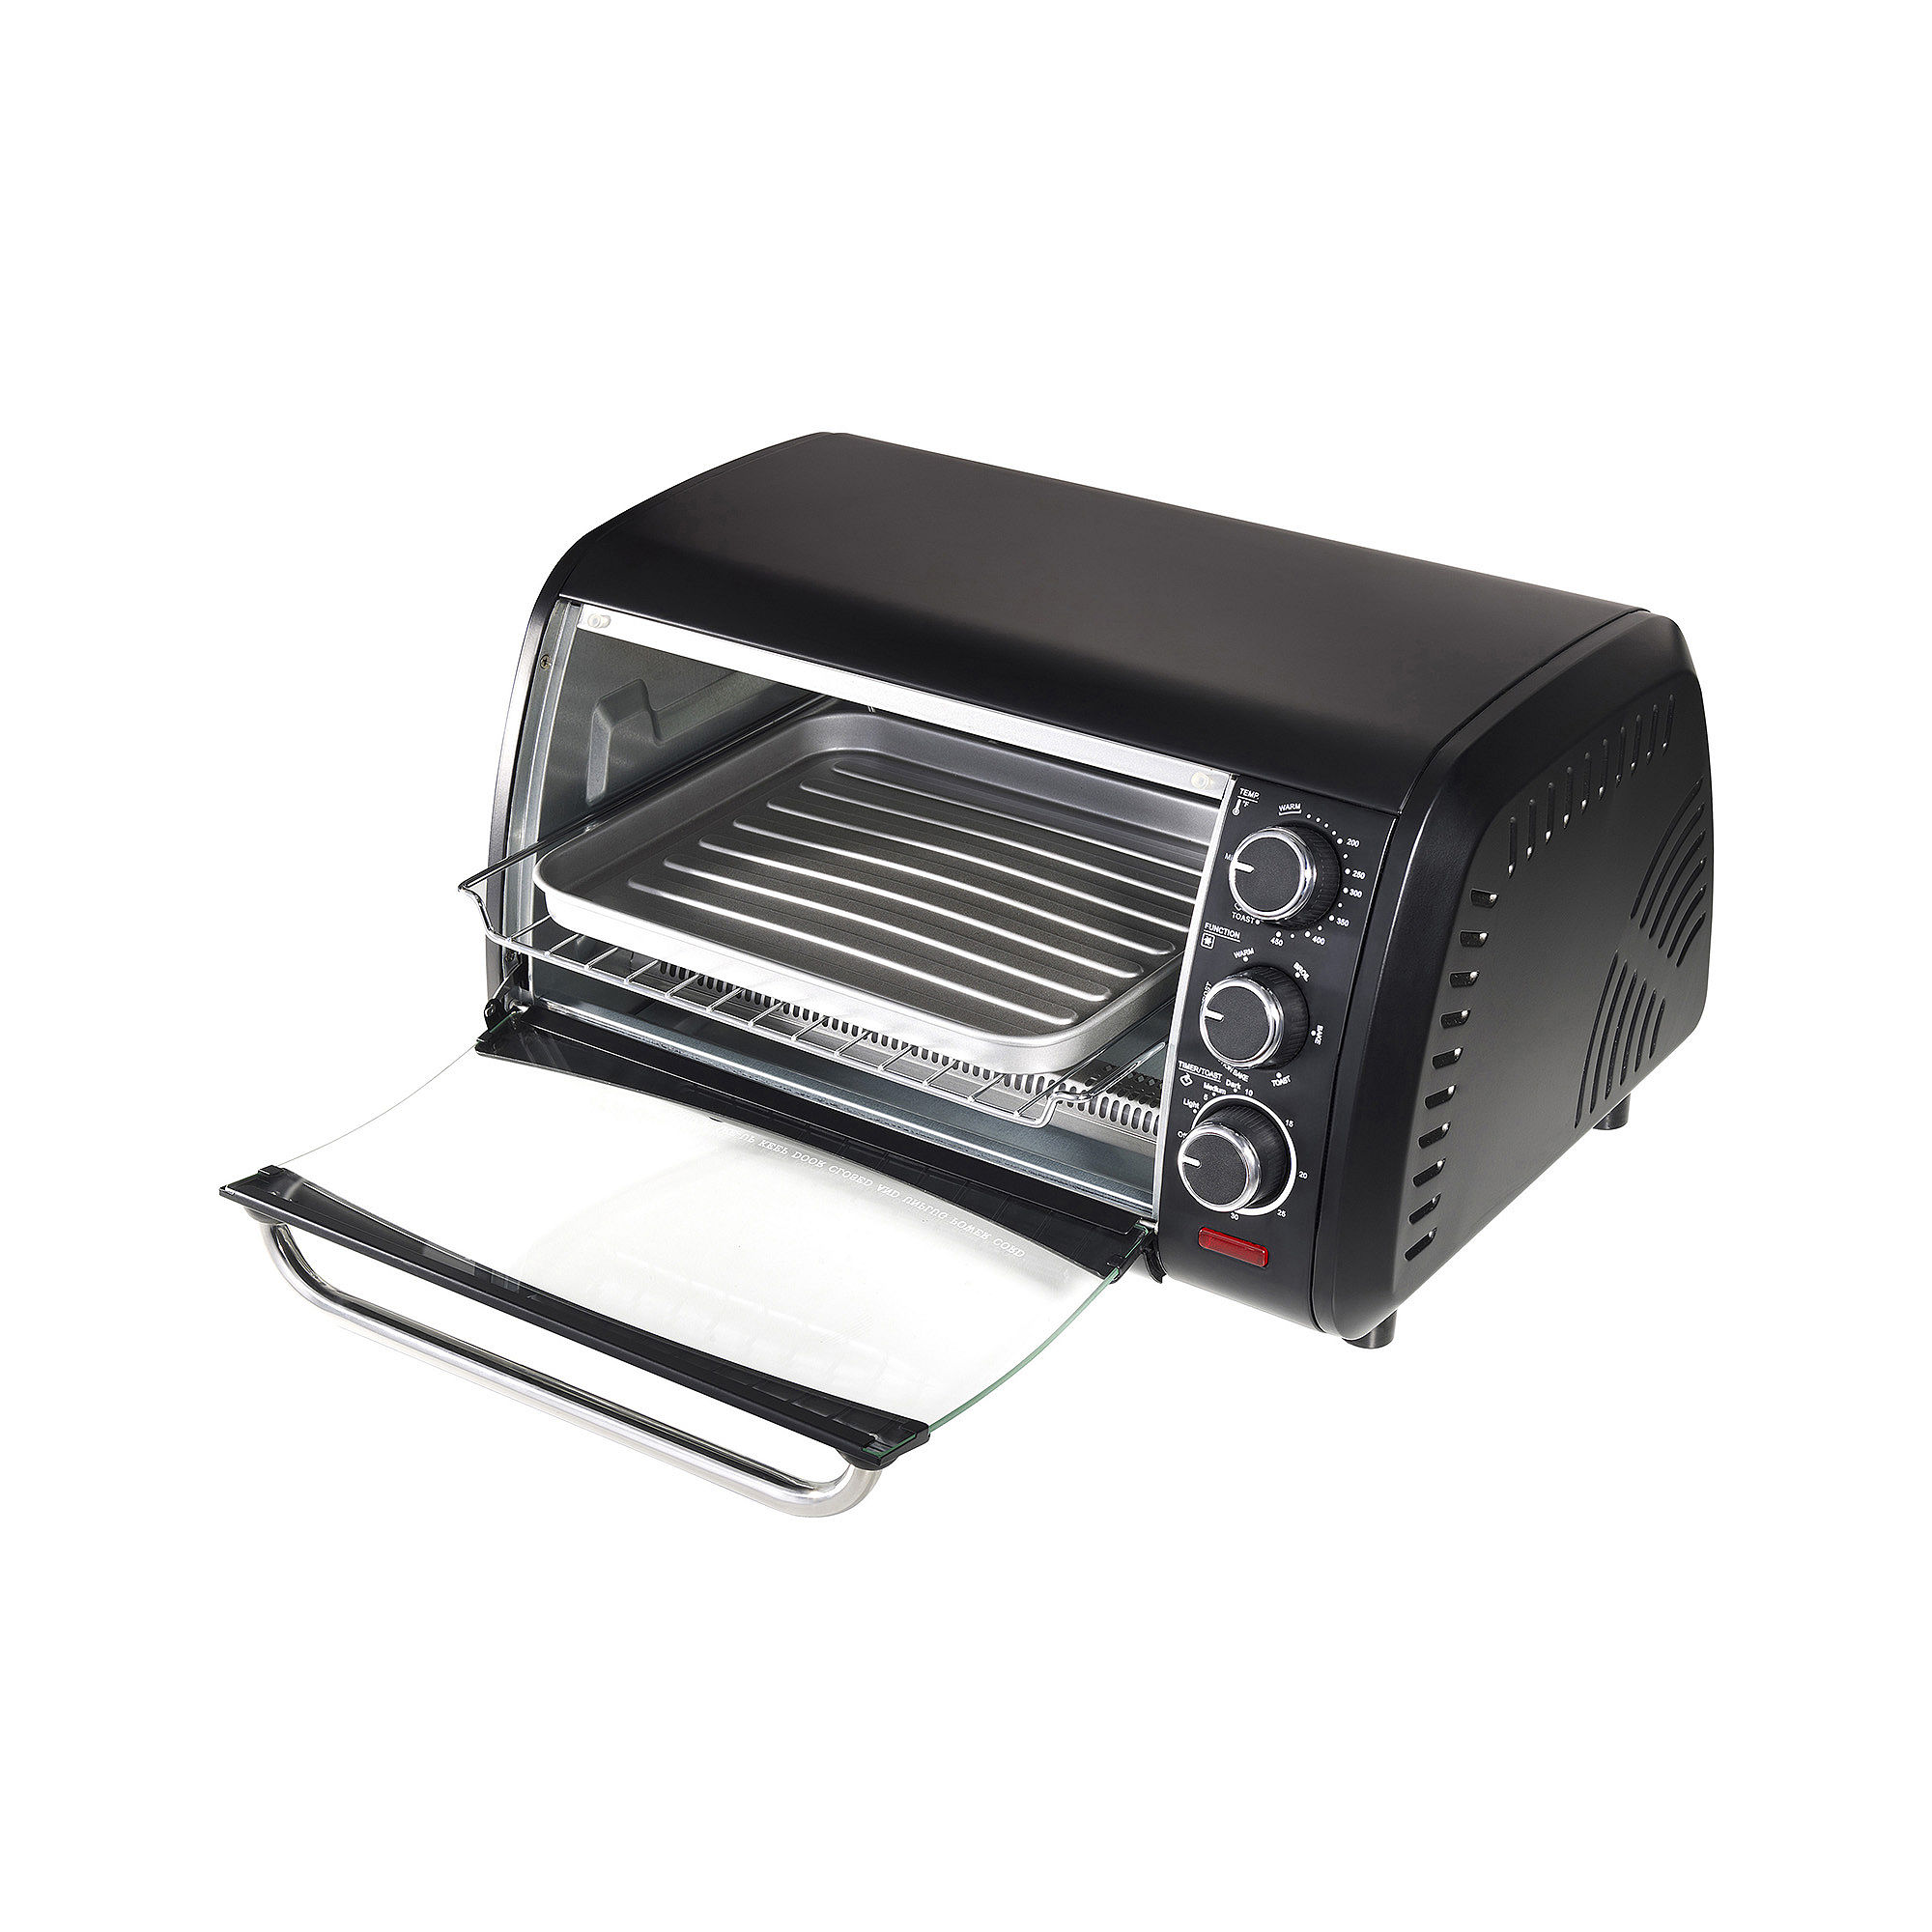 Chefman Convection Toaster Oven